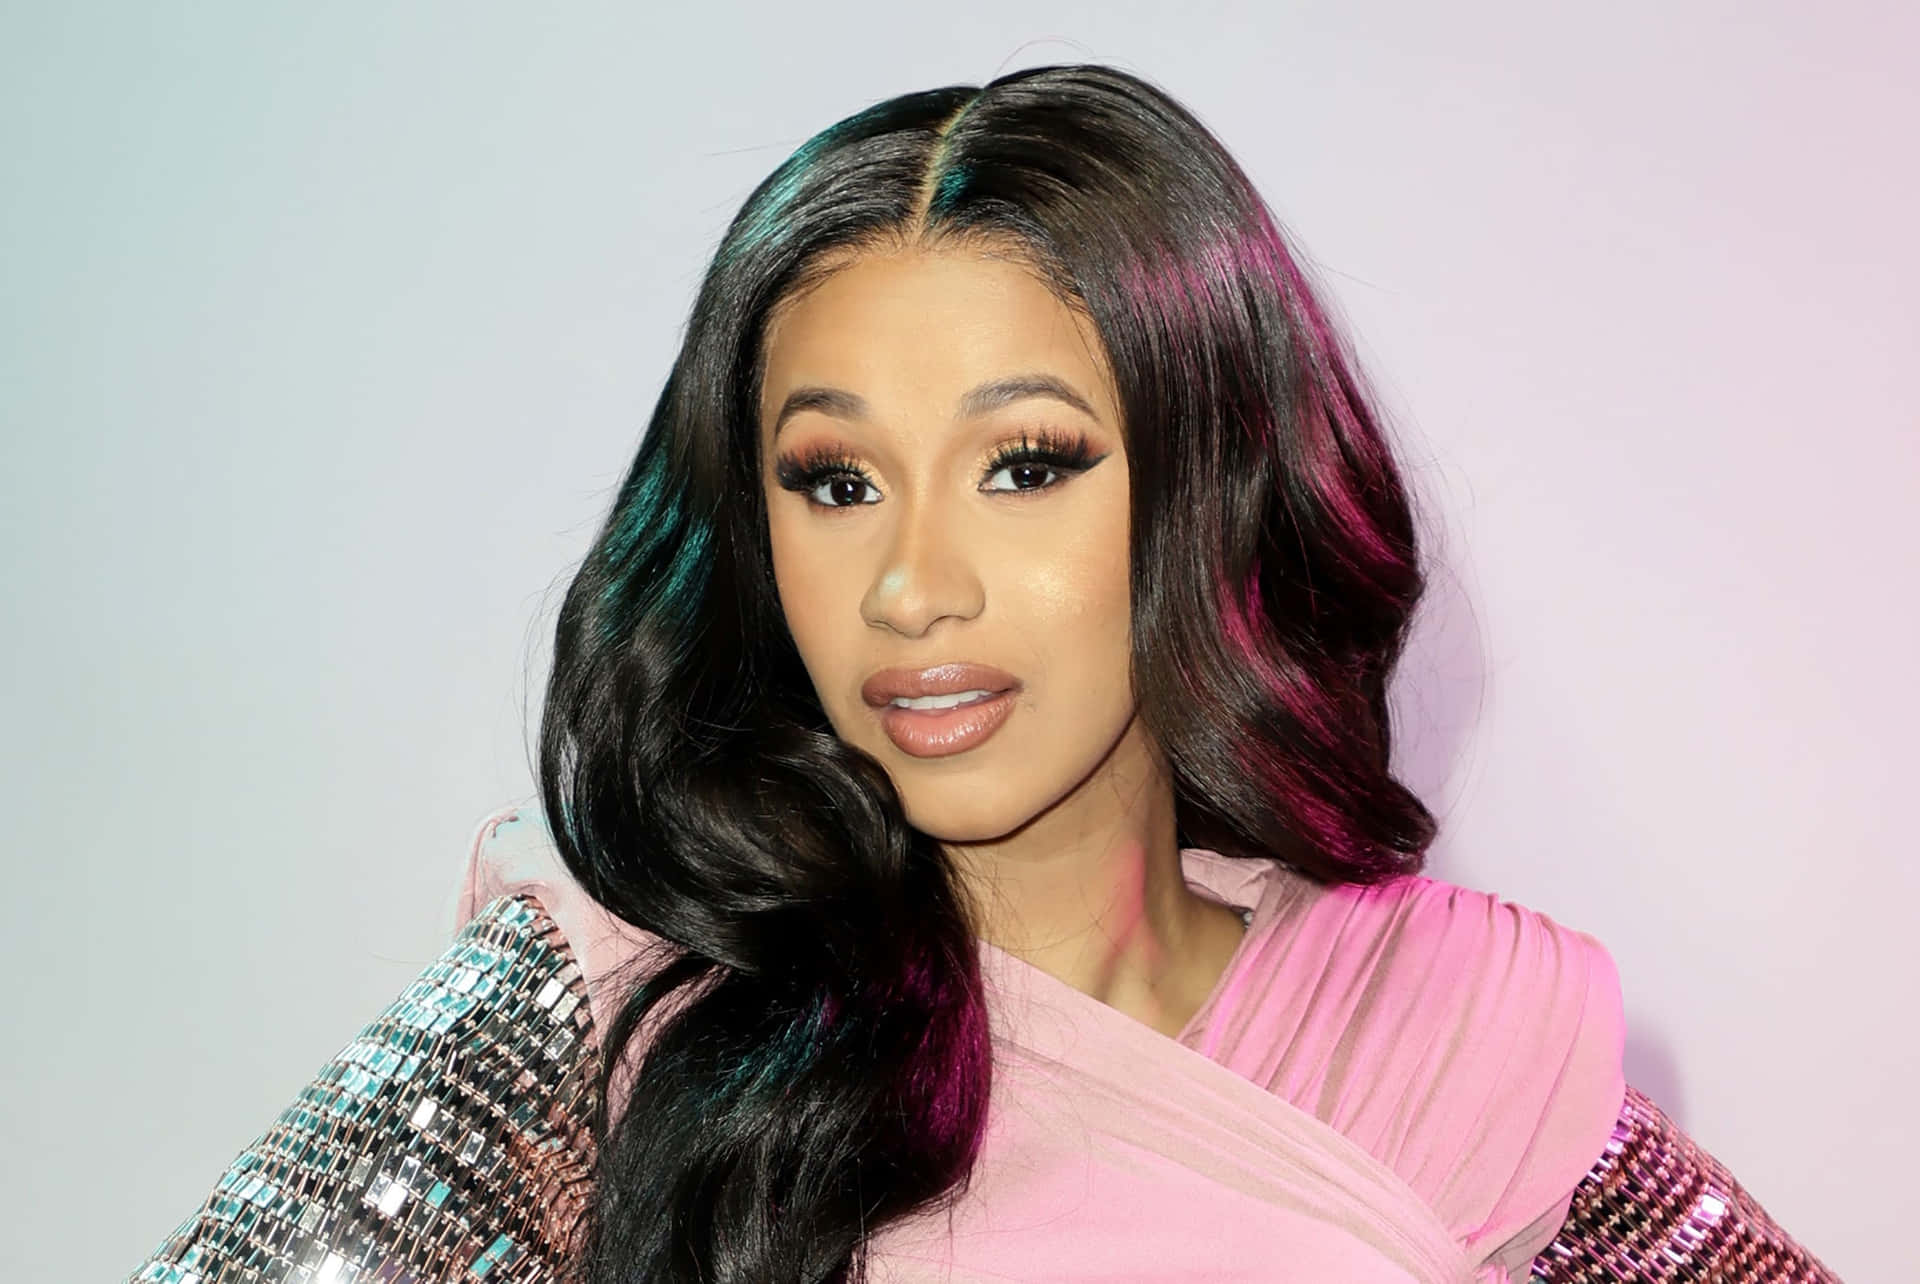 Download Cardi B Pictures | Wallpapers.com